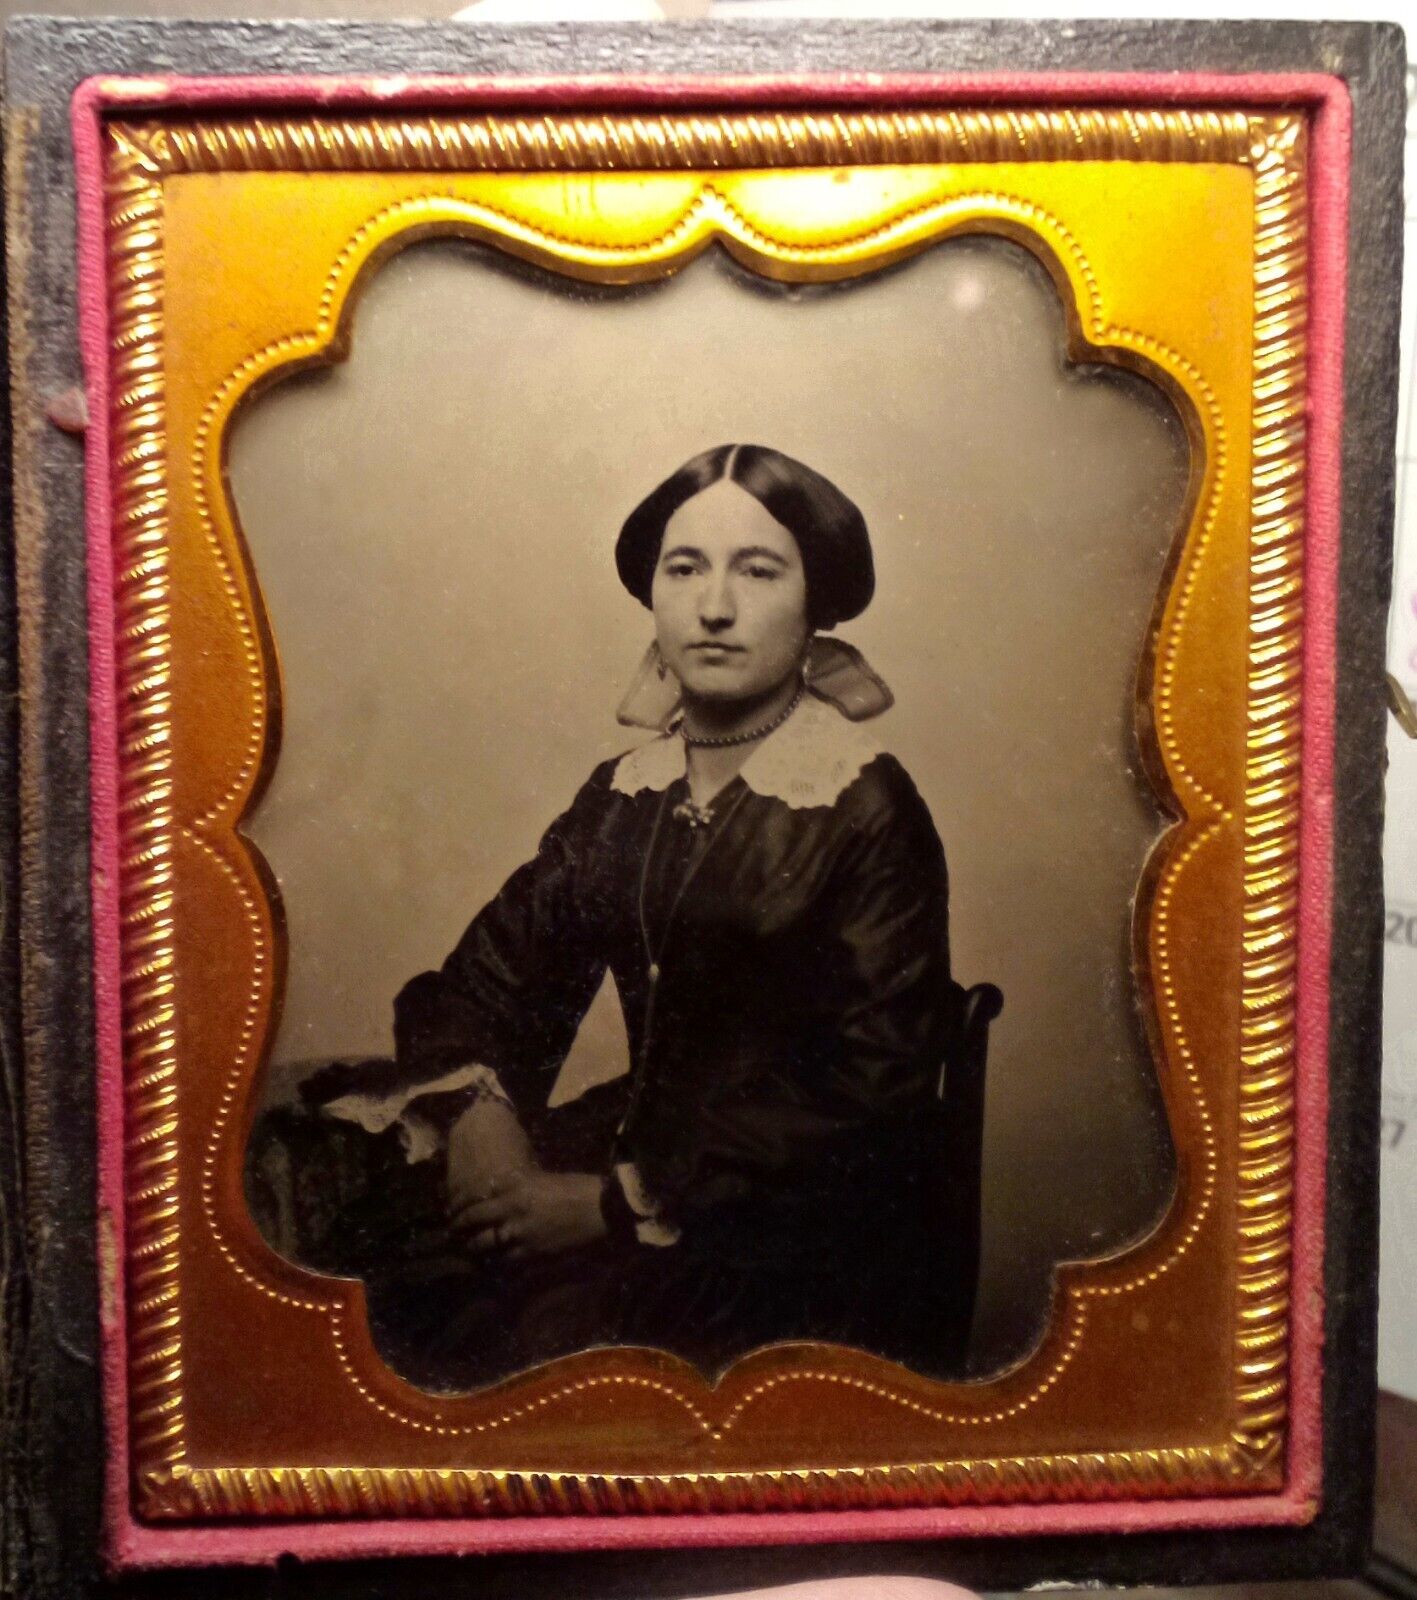 Vintage Old Ambrototype Photo of Pretty Victorian American Woman + Full Case